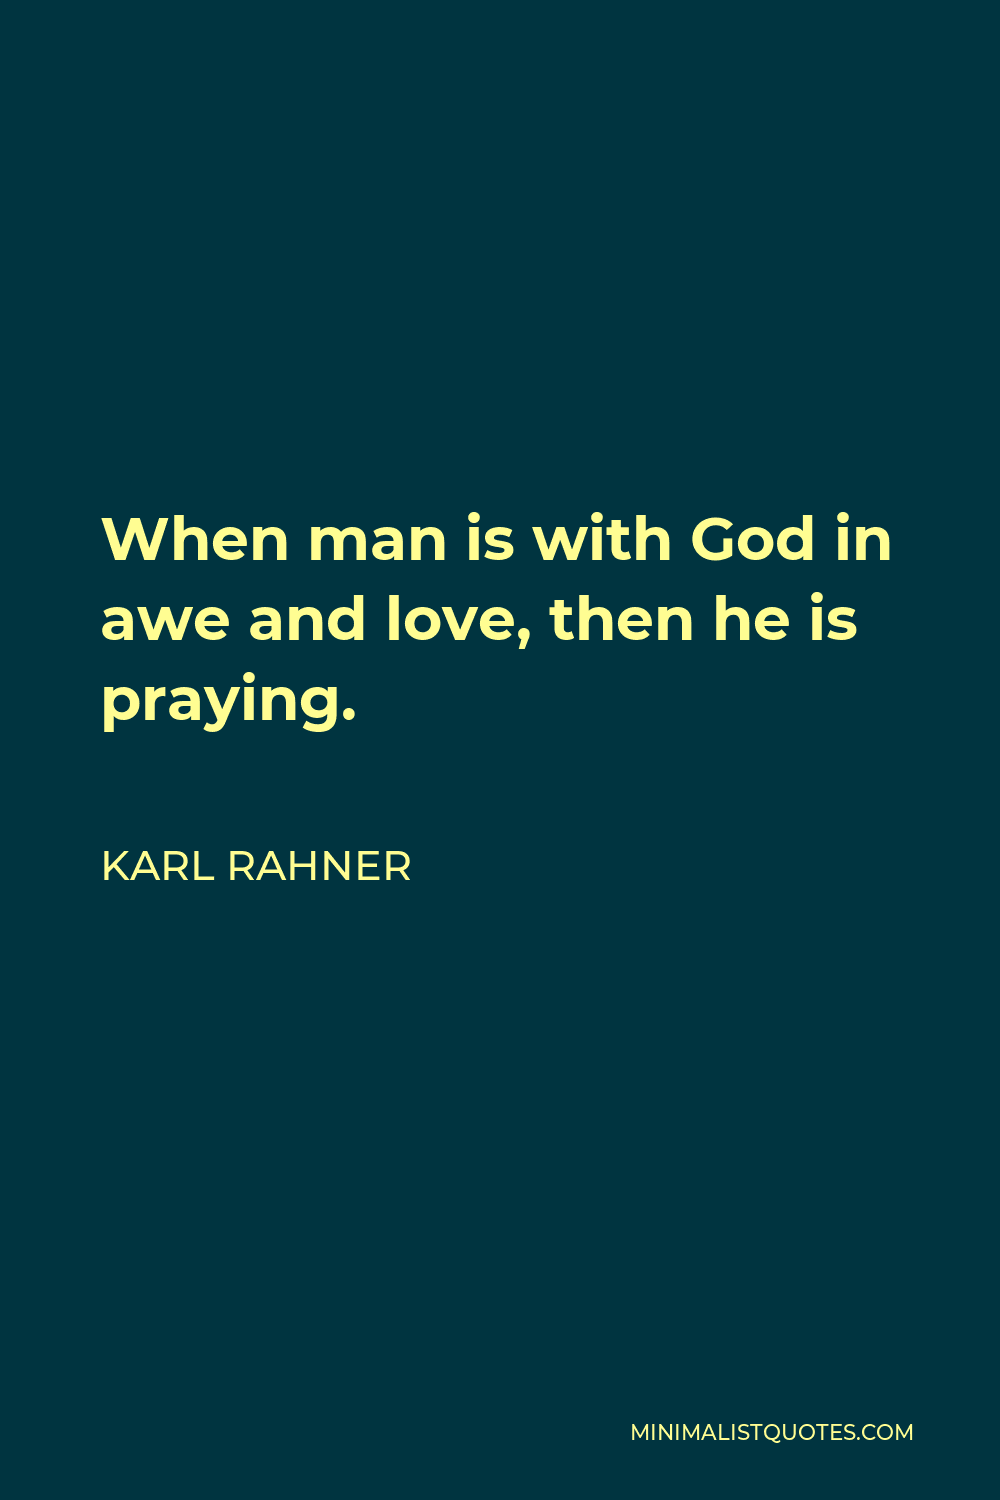 Karl Rahner Quote - When man is with God in awe and love, then he is praying.